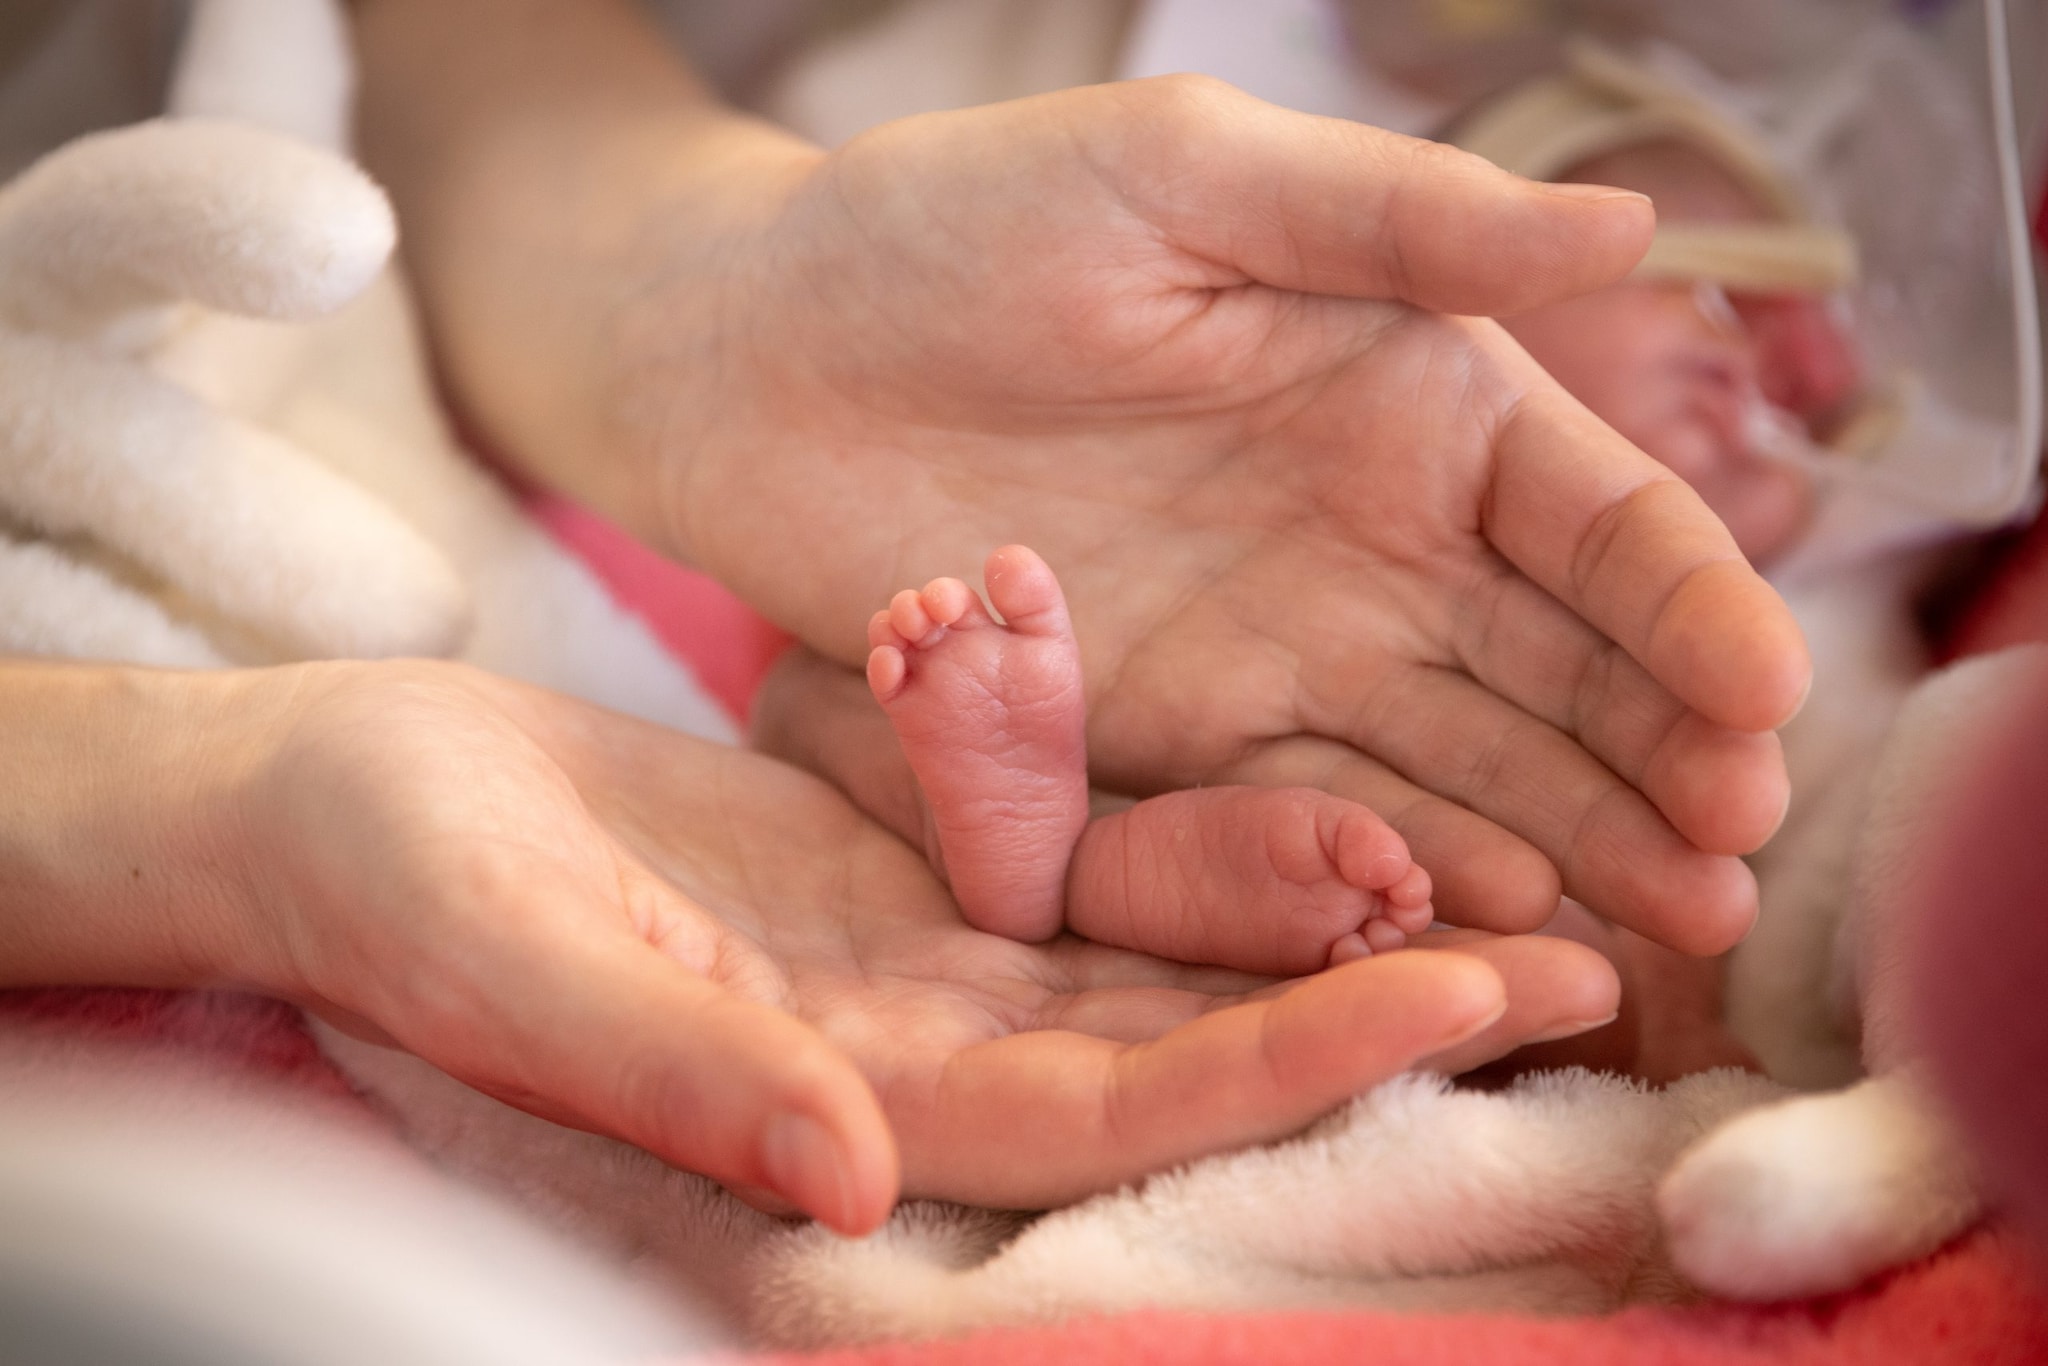 Decorative: adult hands holding the tiny feet of a prematurely born